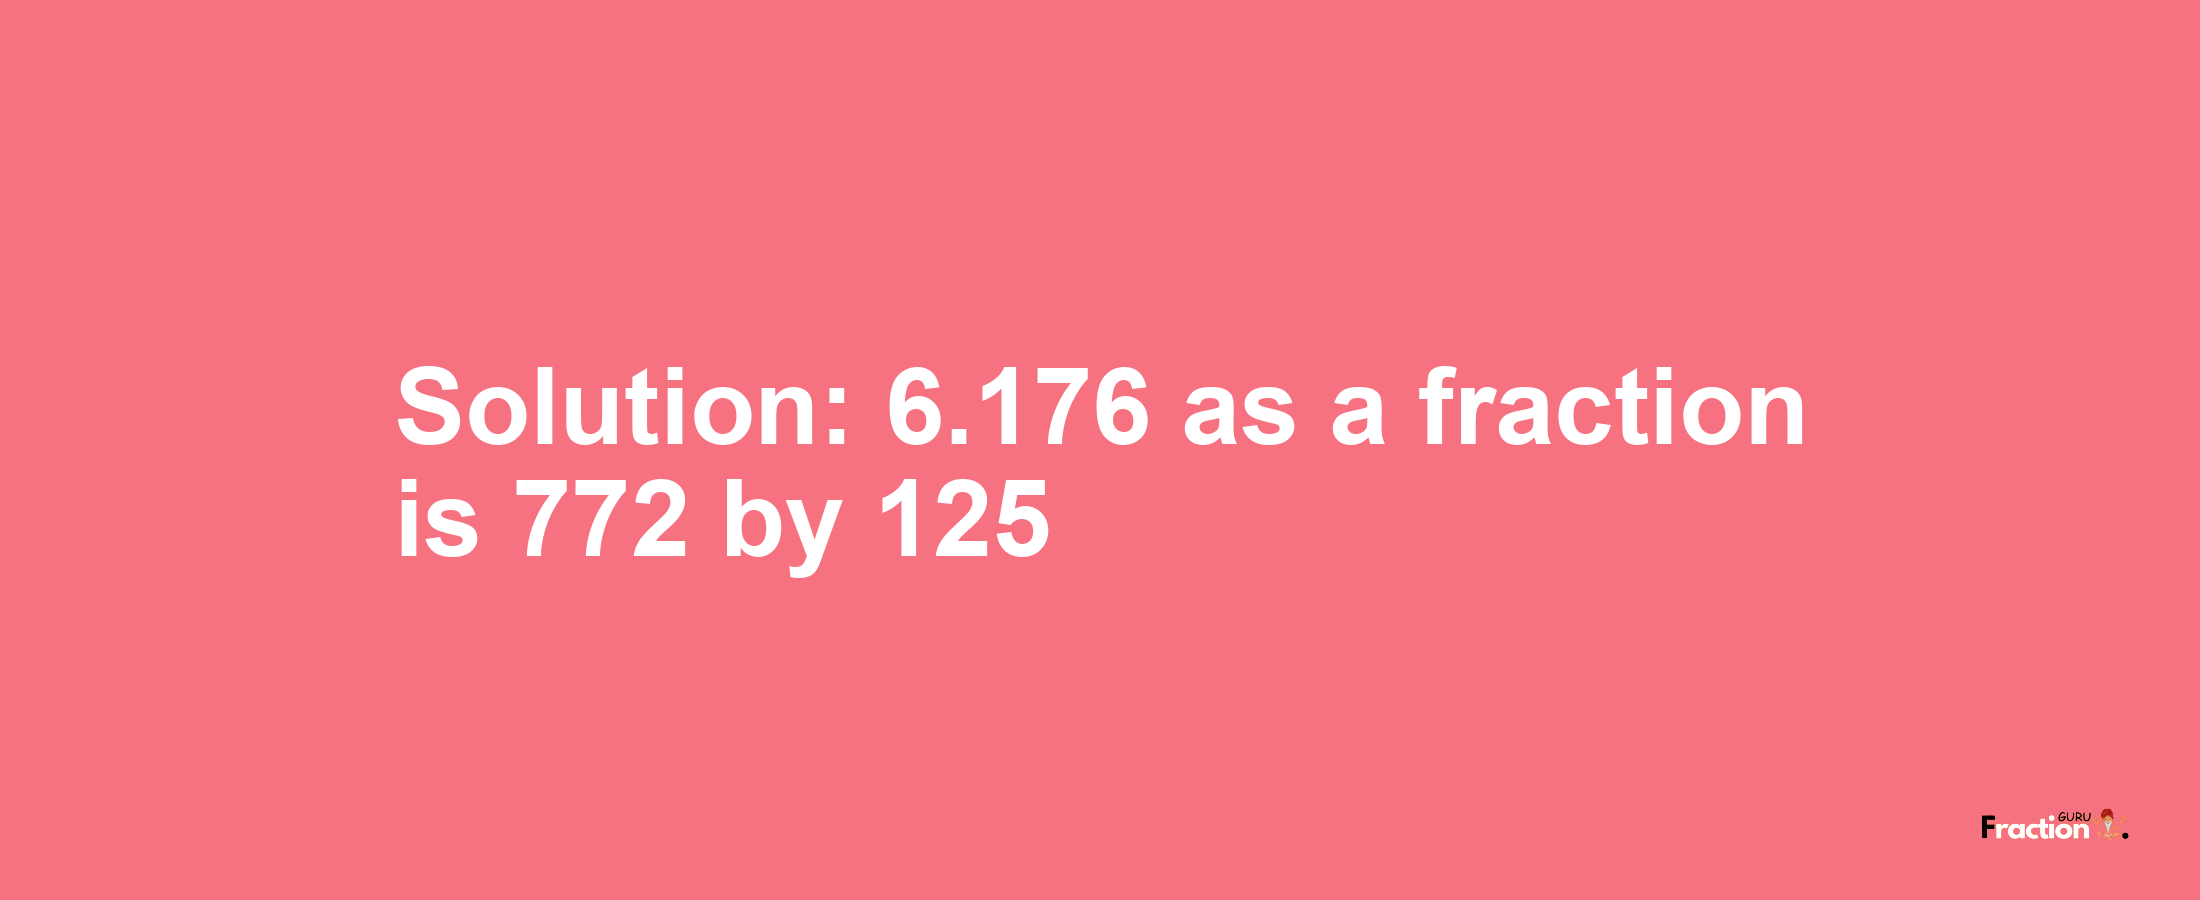 Solution:6.176 as a fraction is 772/125